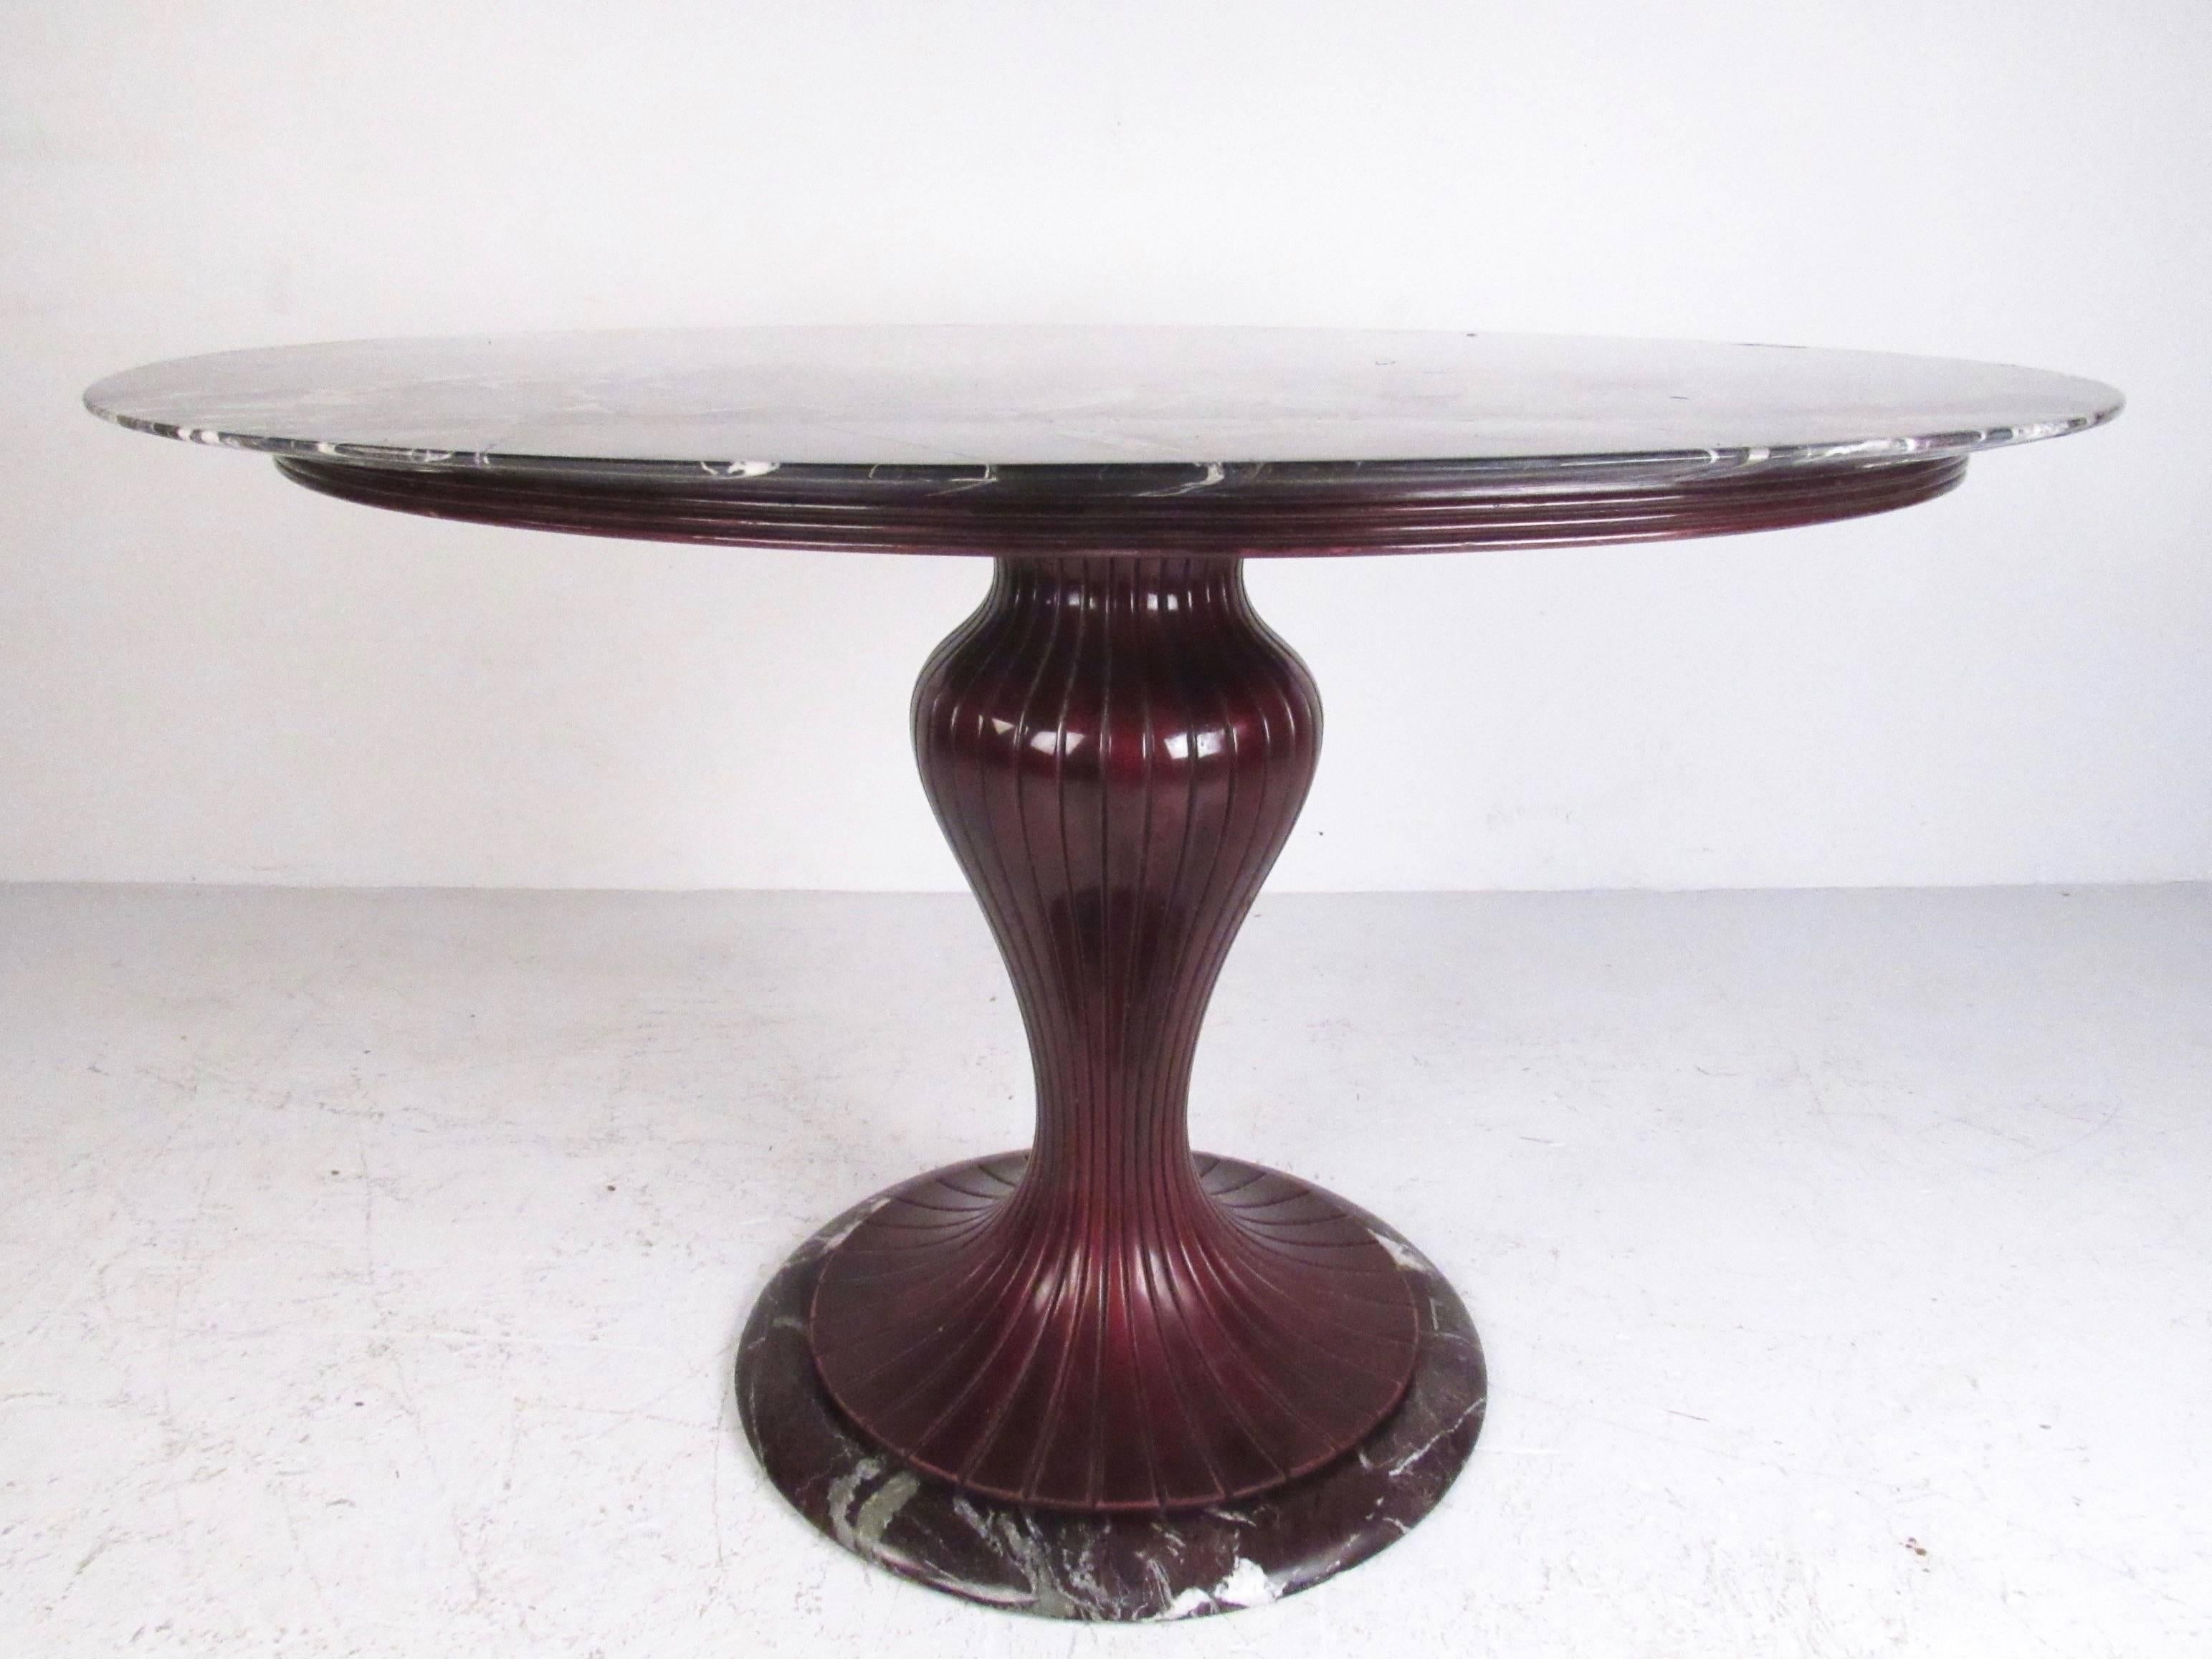 This stylish Italian pedestal table features a circular marble top set on an ornately tapered pedestal base. Mid-Century style make this an excellent center table for an entryway and an impressive addition to home or business. Please confirm item